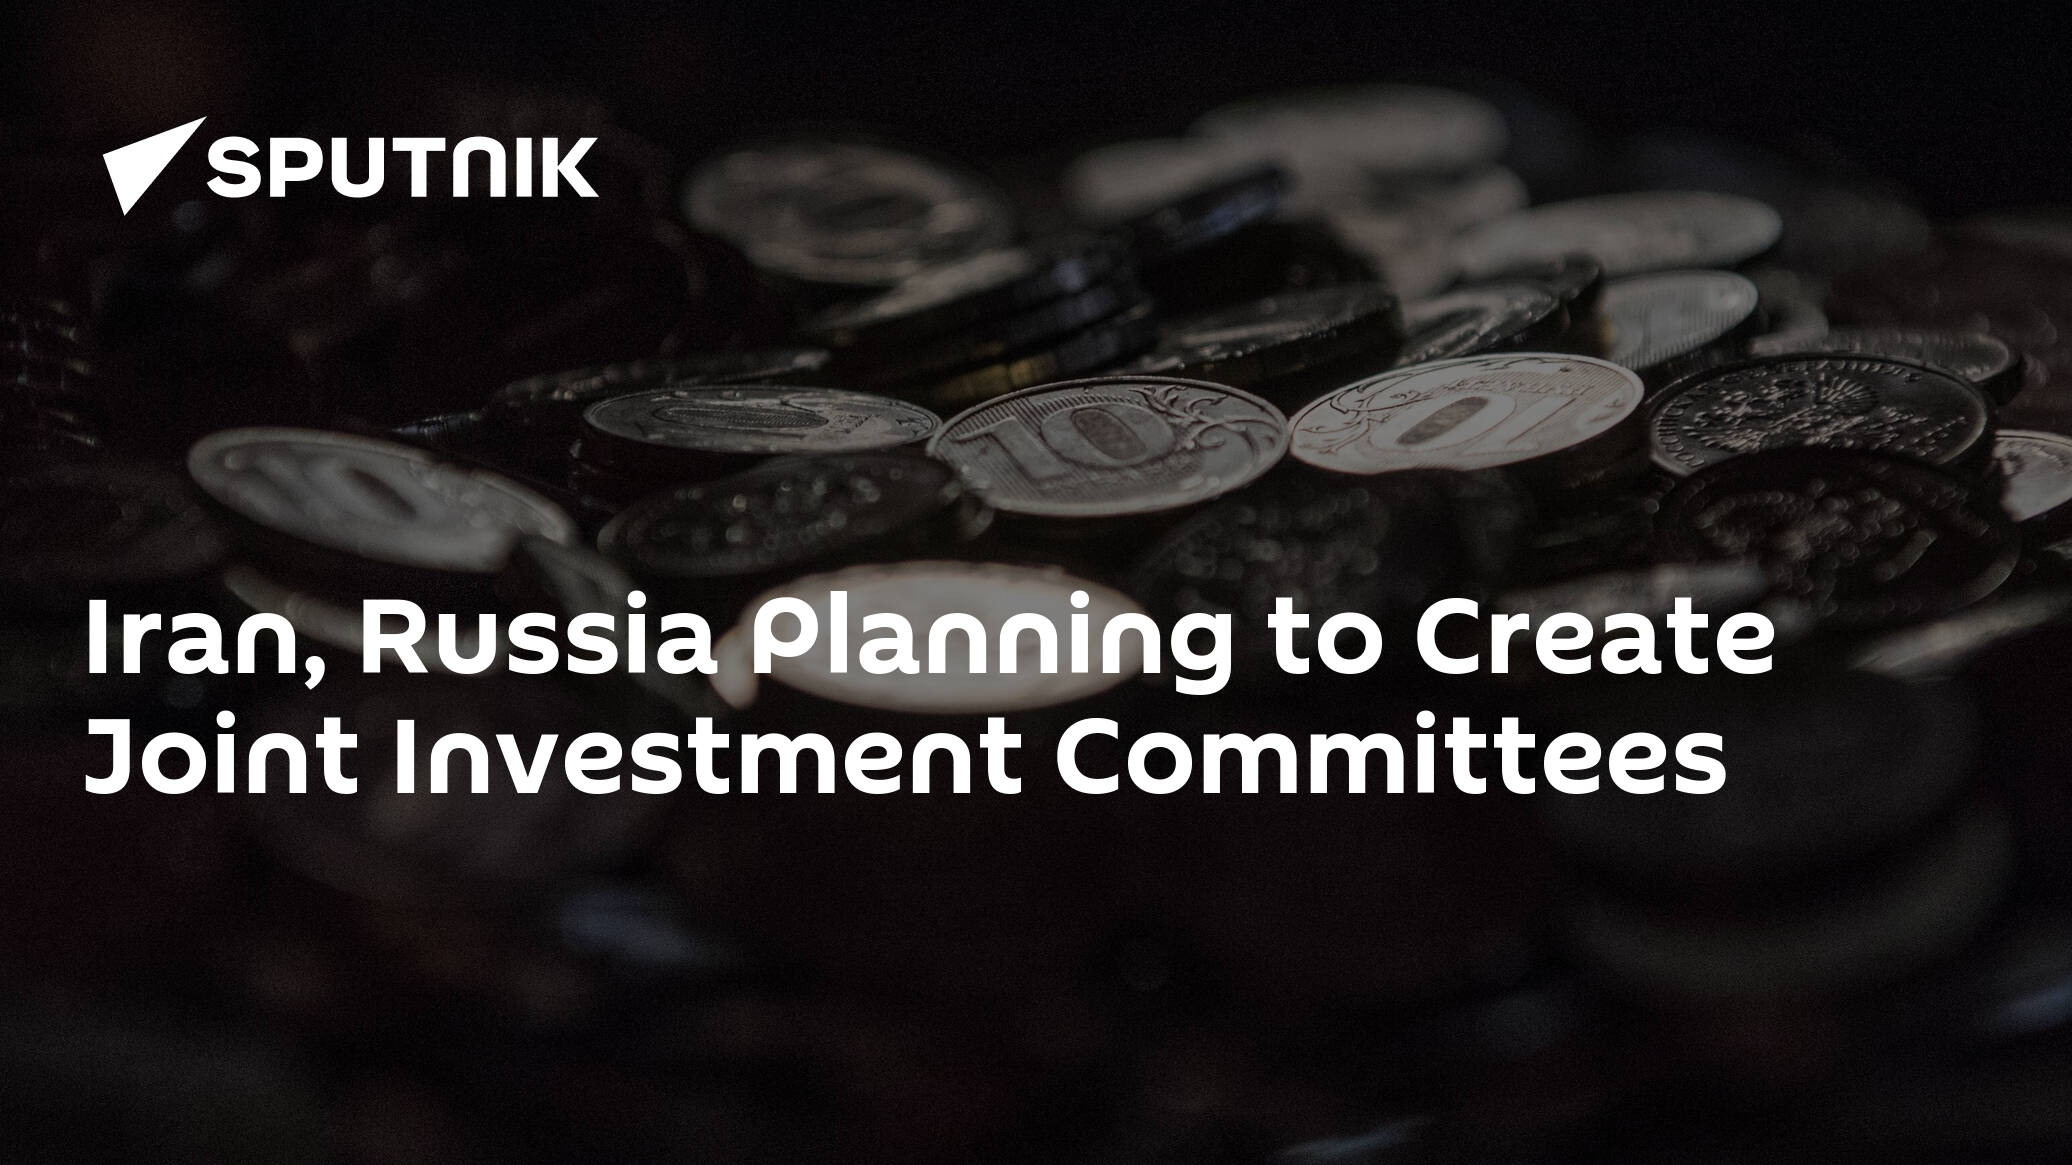 Iran, Russia Planning to Create Joint Investment Committees